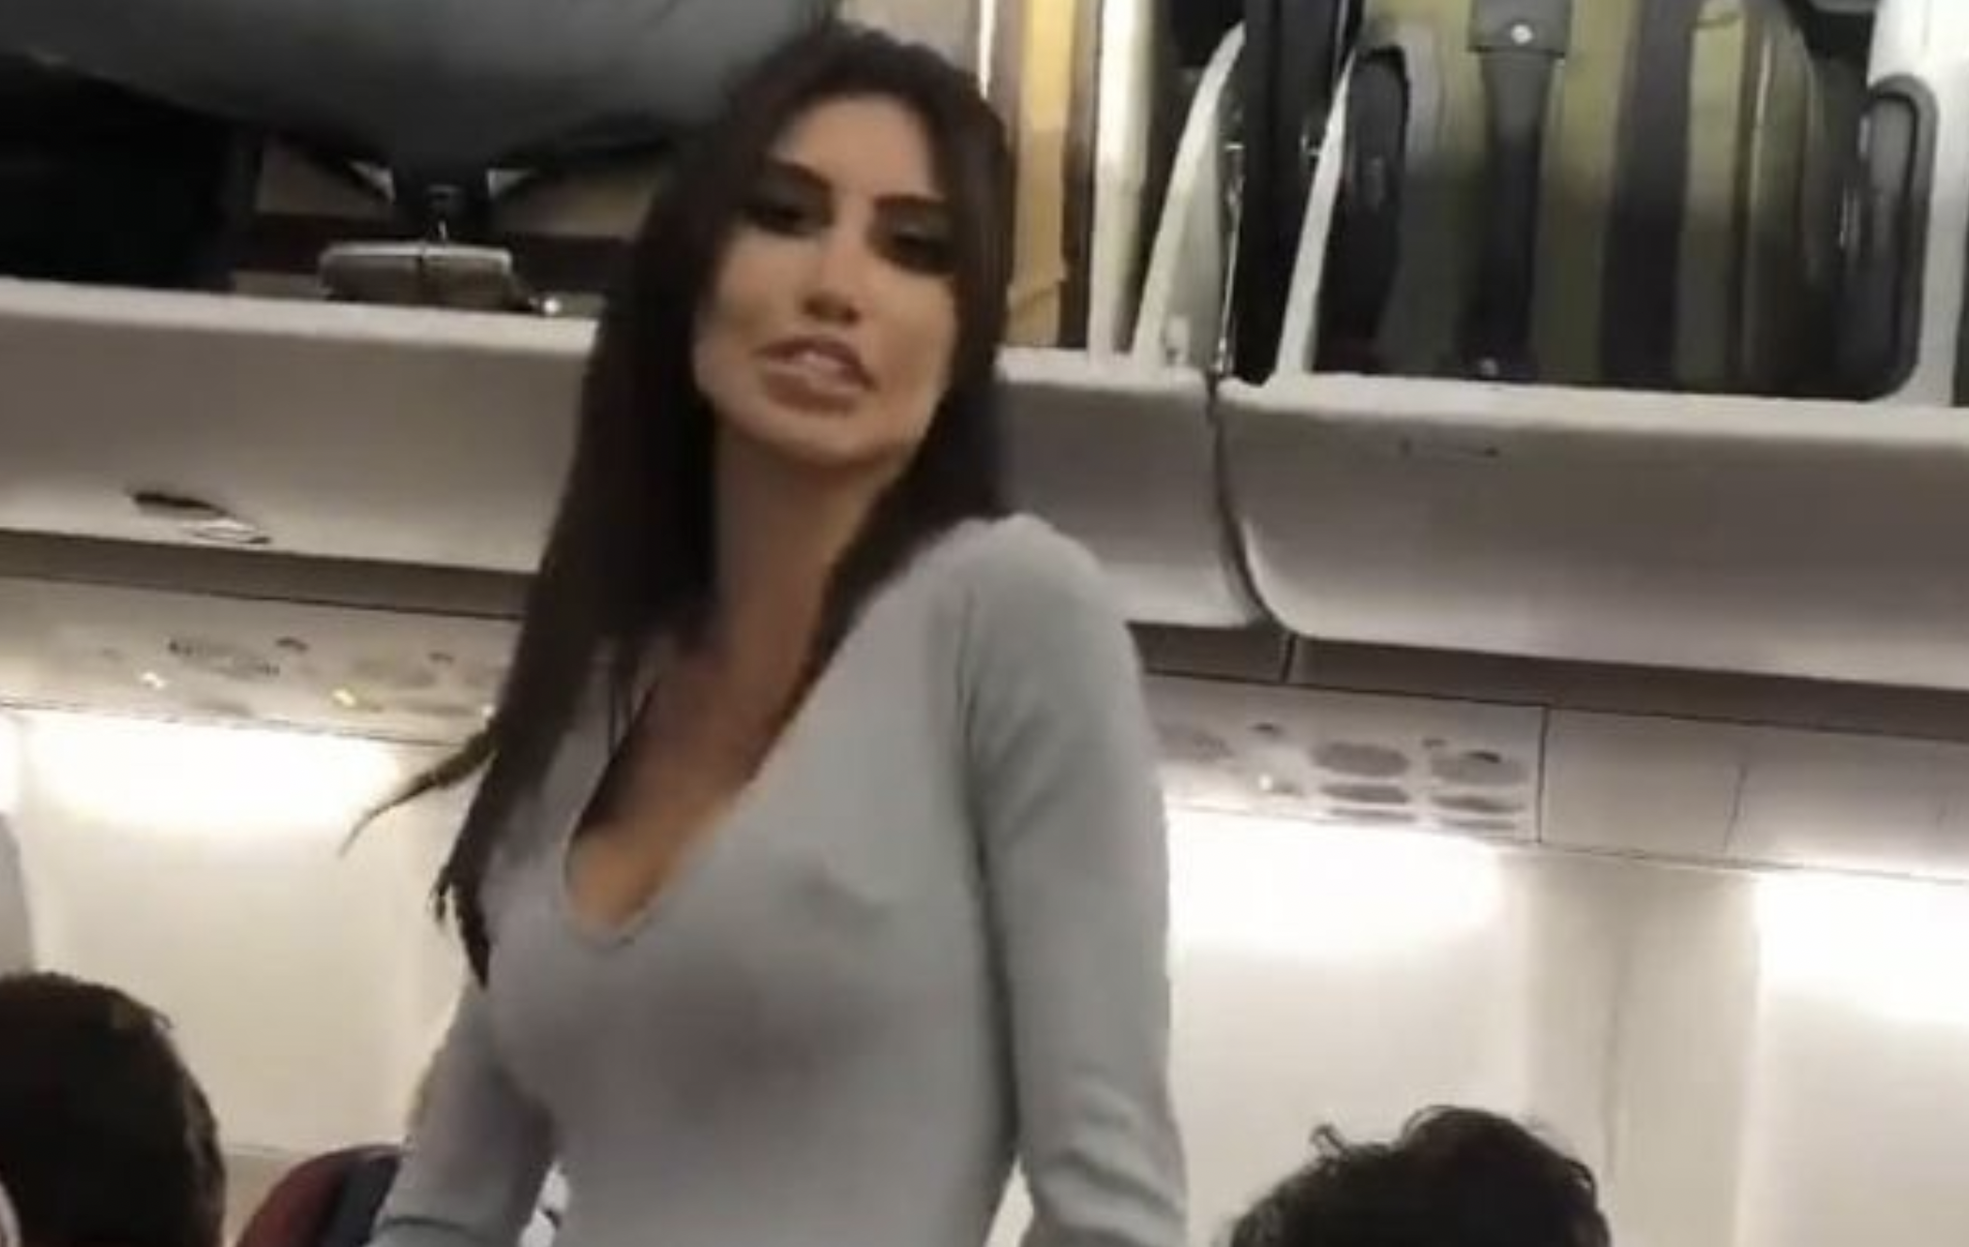 While it's unclear what the Instagram model Morgan Osman did to get herself removed from a recent flight, her departing outburst was crystal. Getting the last word in, she encouraged the man taping her outburst; "Film me, I'm Instagram famous." She later took to social media to proclaim that she chose to leave the flight herself, so that things wouldn't "[turn] violent."